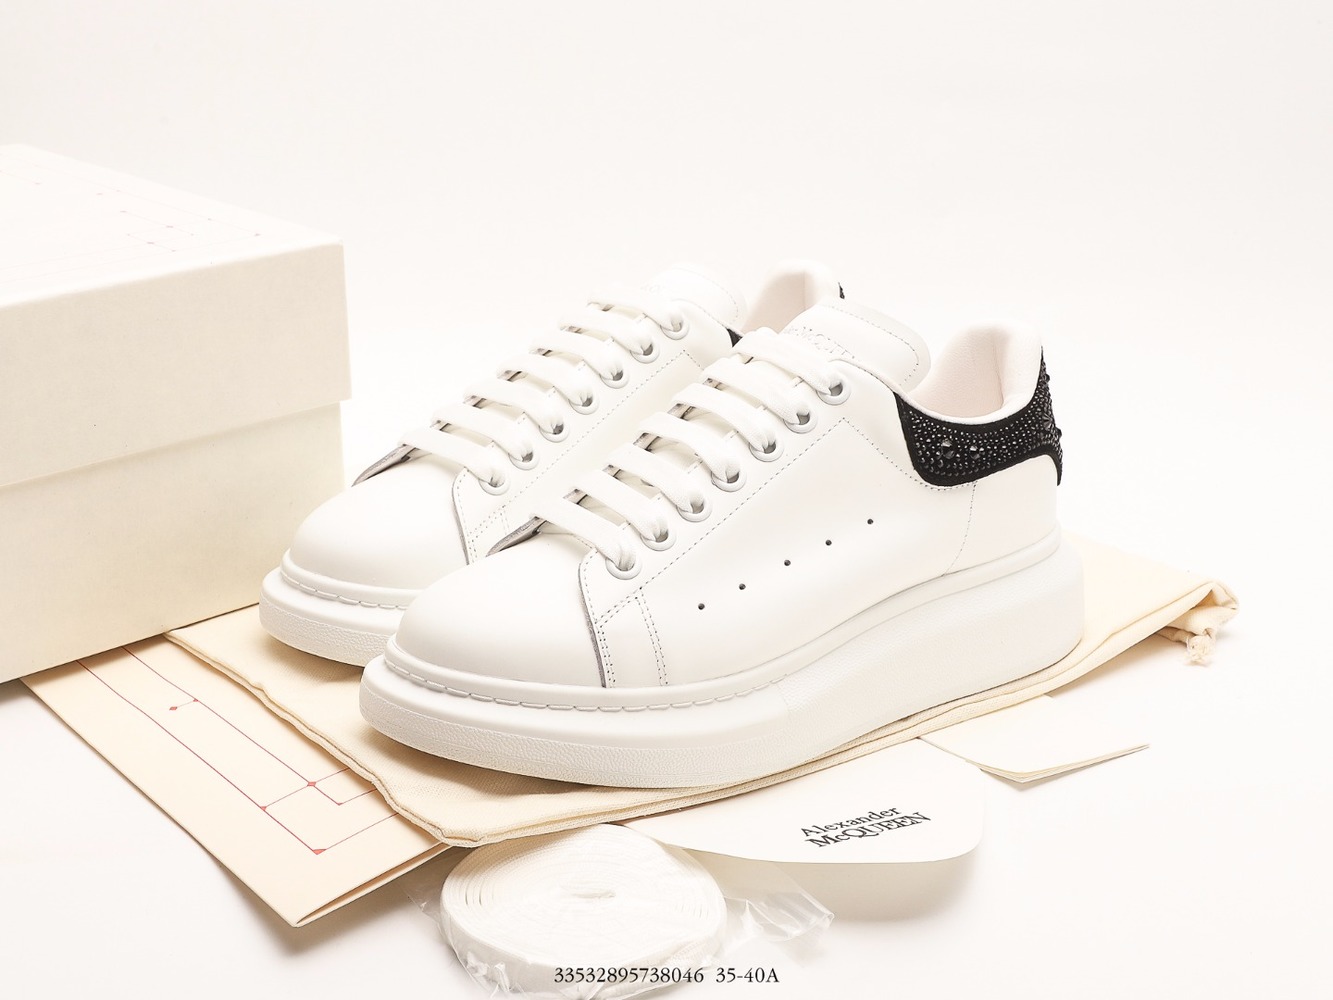 Alexander McQueen Sole Leather Sneakers_Size_35 36 37 38 39 40_